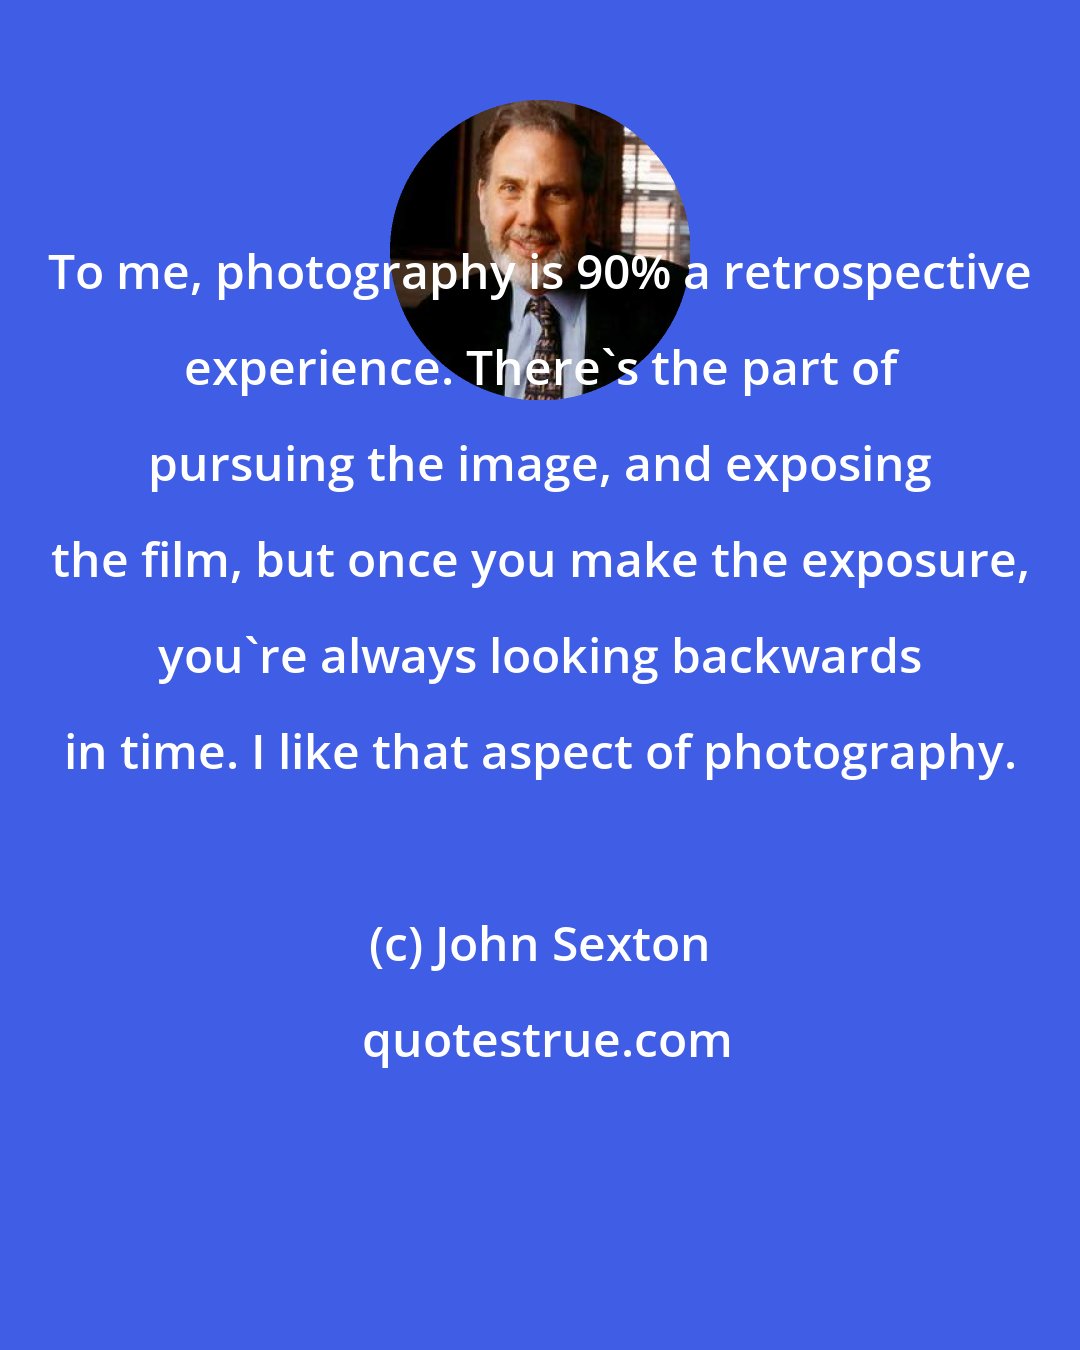 John Sexton: To me, photography is 90% a retrospective experience. There's the part of pursuing the image, and exposing the film, but once you make the exposure, you're always looking backwards in time. I like that aspect of photography.